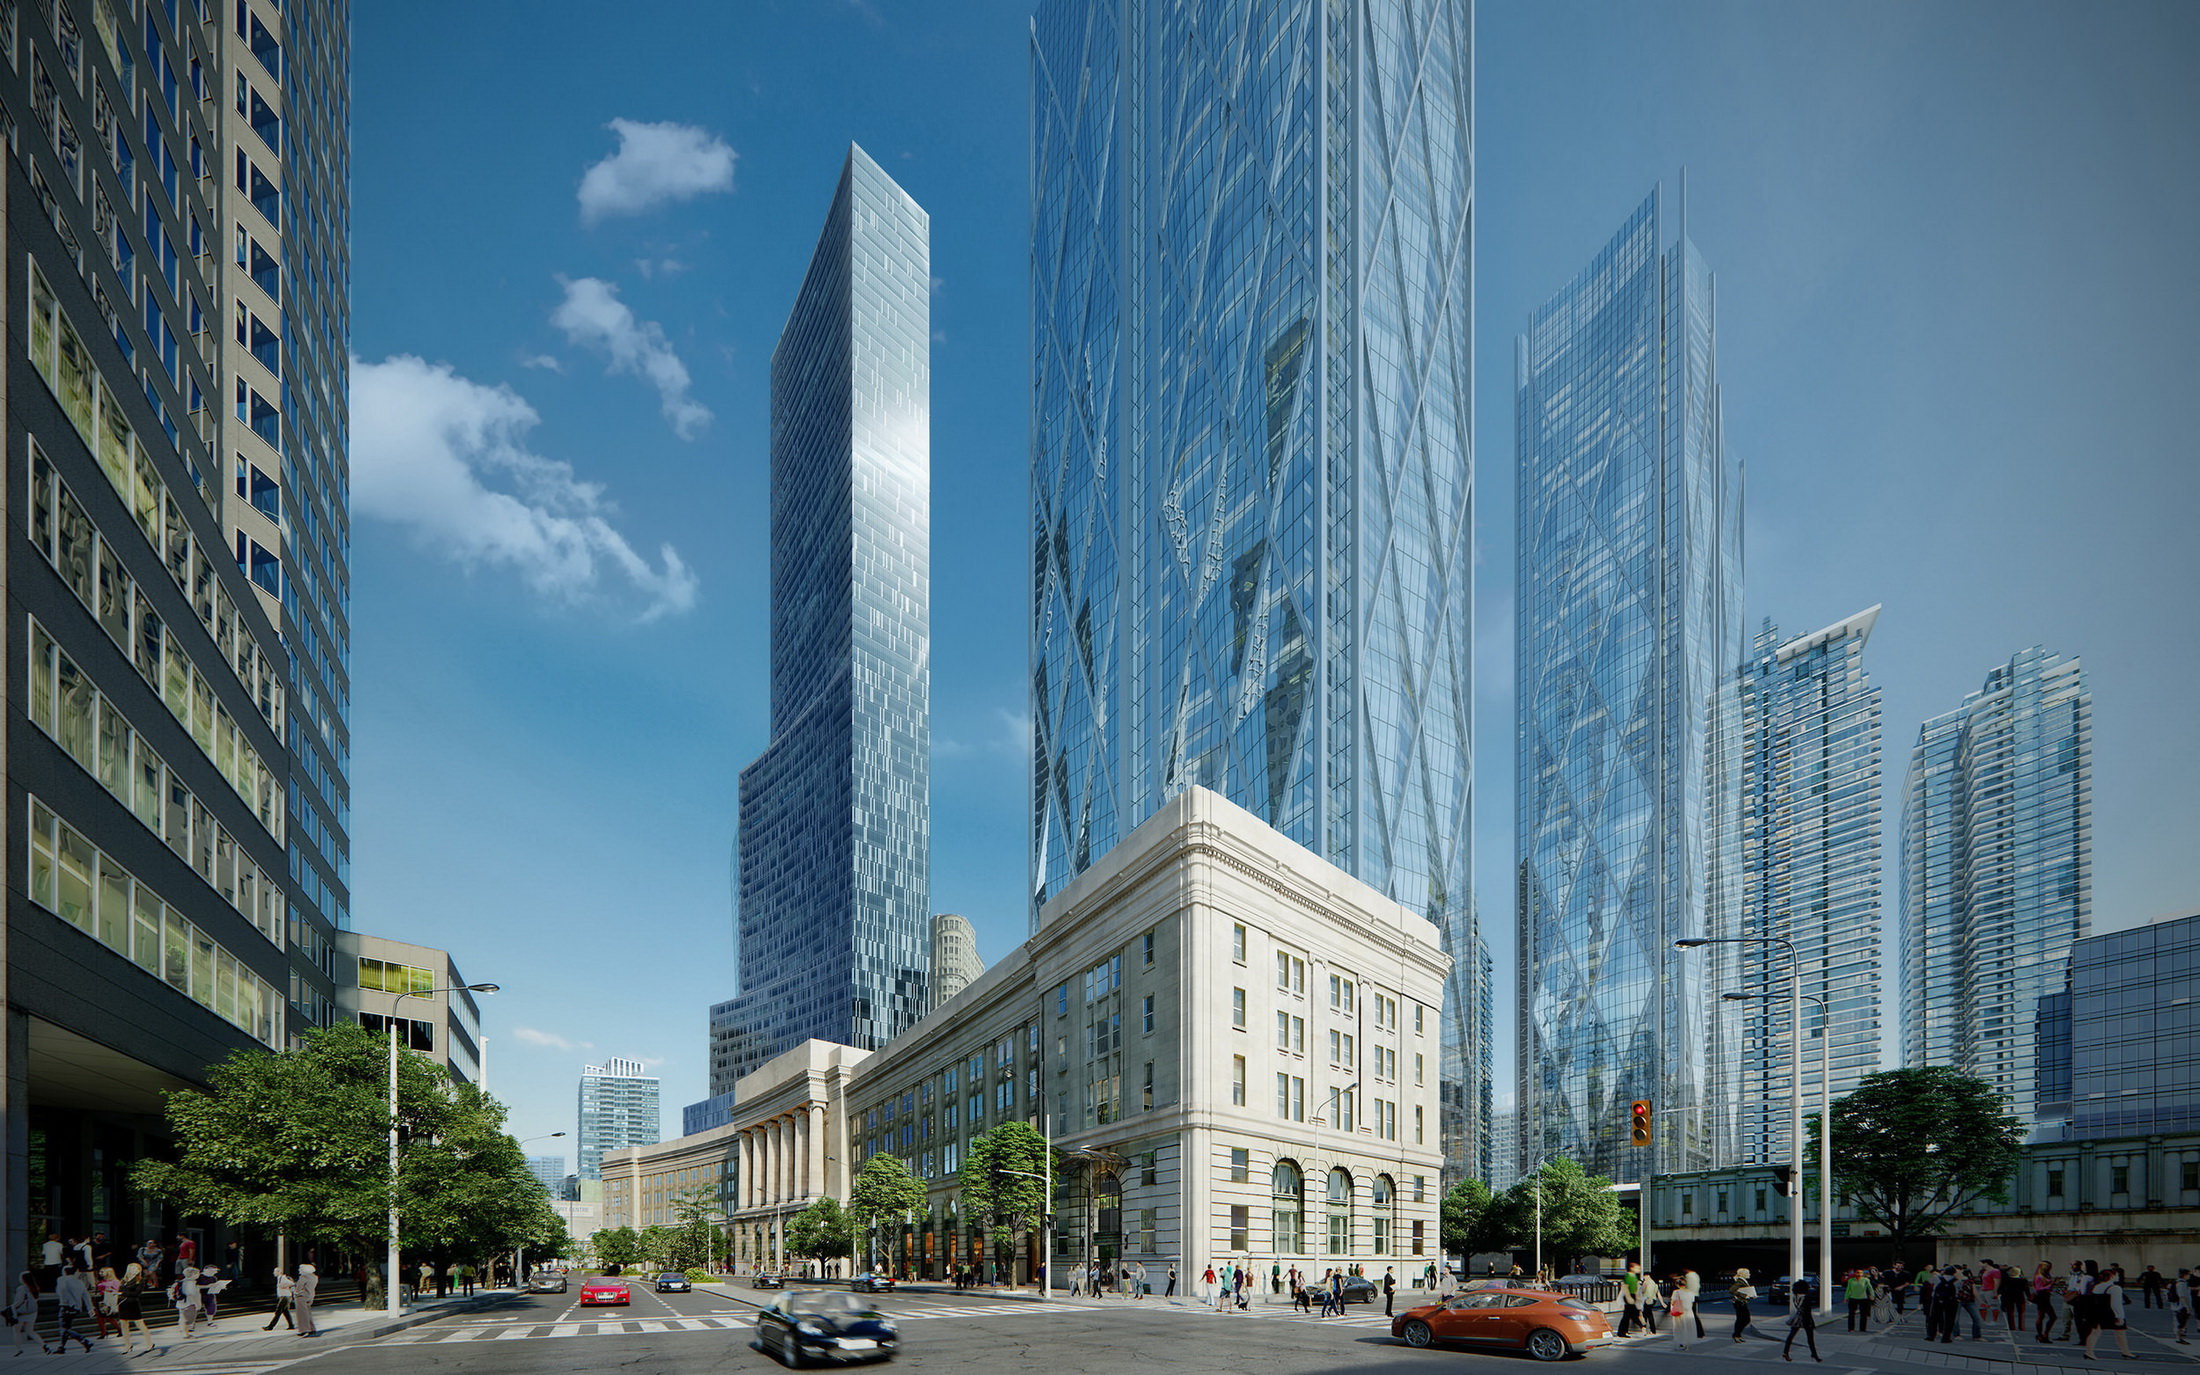 High-end architectural visualization of a skyscraper concept among the existing historic buildings, 3D street view in daylight